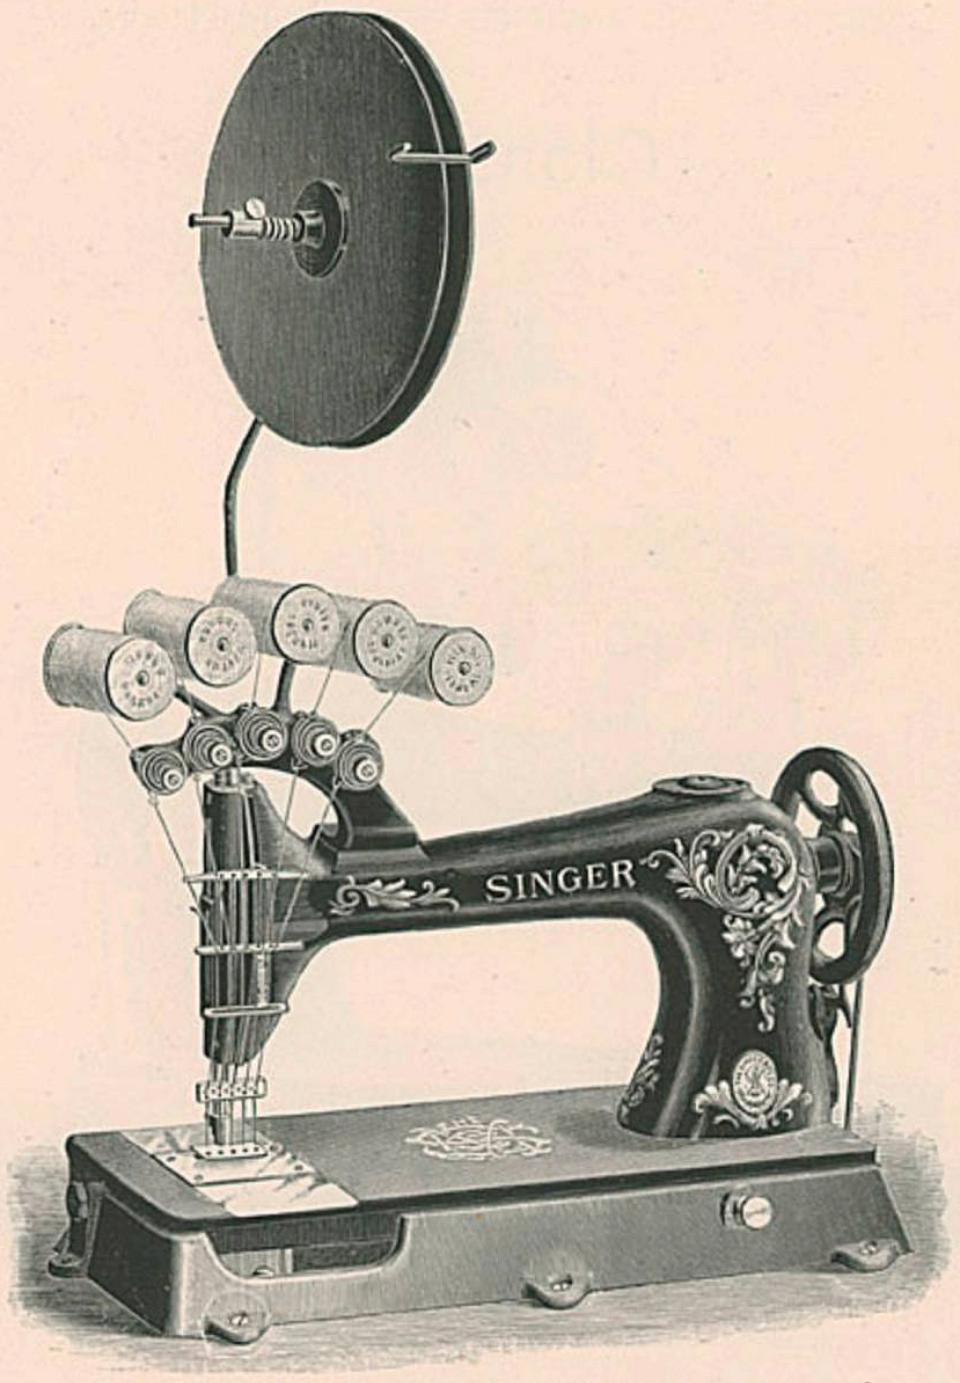 Singer Model 41-5 Sewing Machine with 5 shuttles and 5 needles